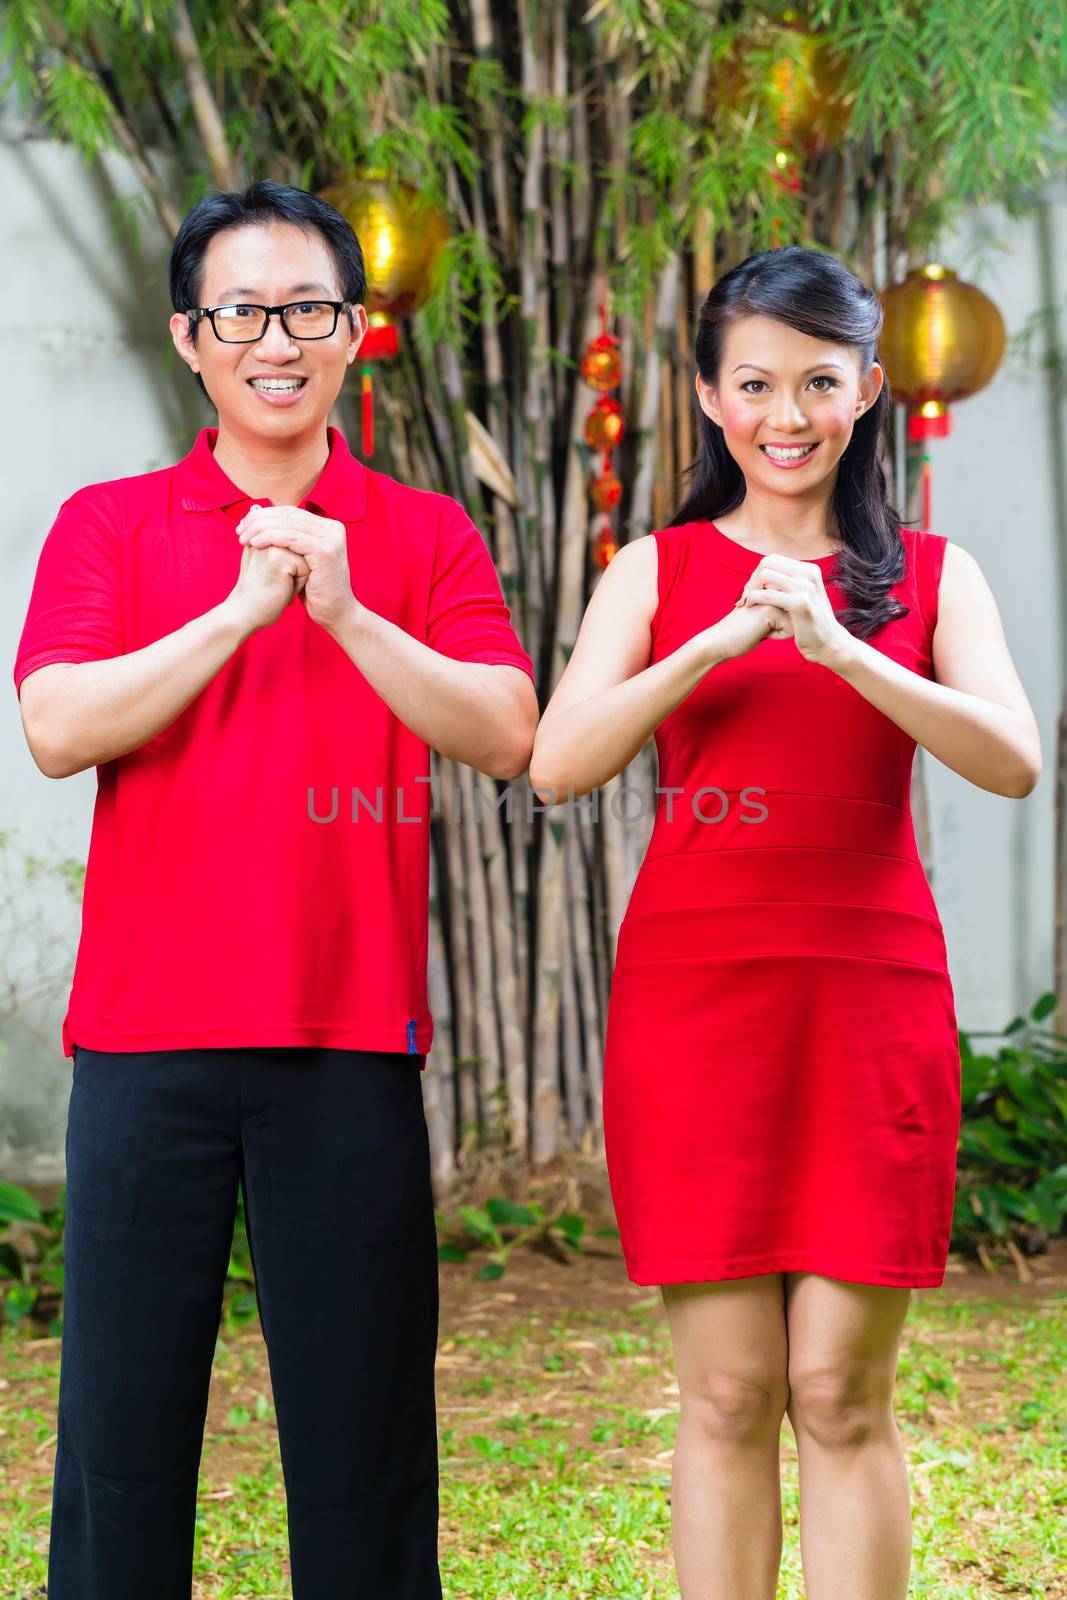 Couple celebrating Chinese new year traditional greeting, wearing red